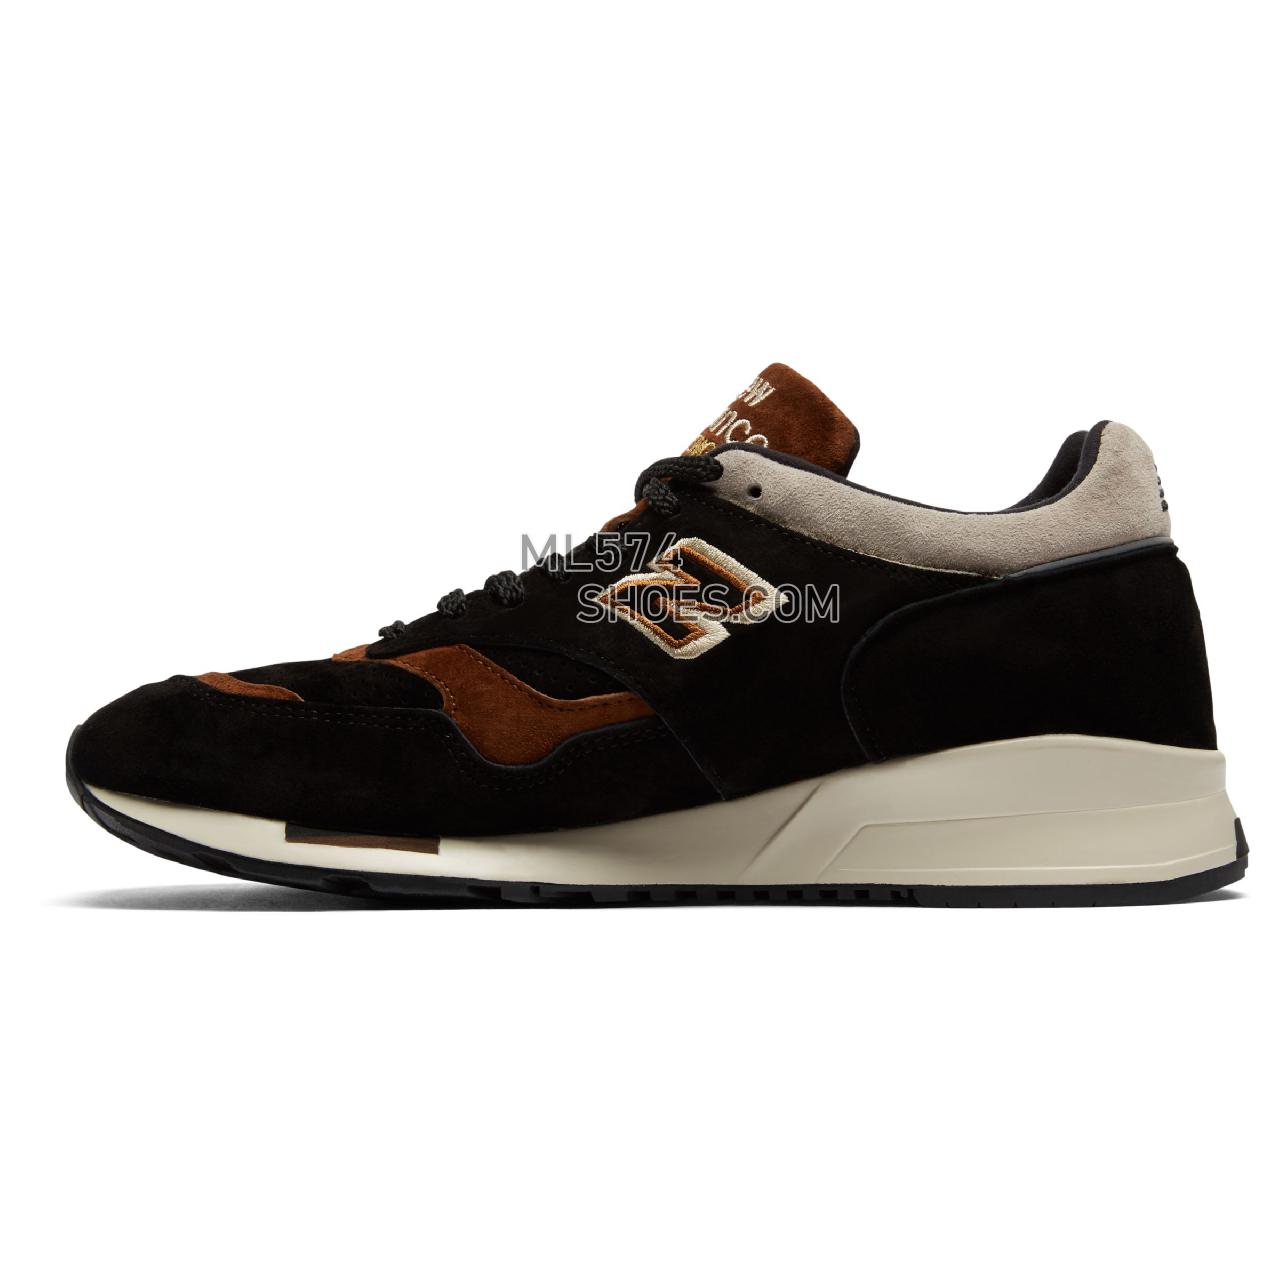 New Balance Made in UK 1500 - Men's Made in USA And UK Sneakers - Black with Brown and Beige - M1500YOR